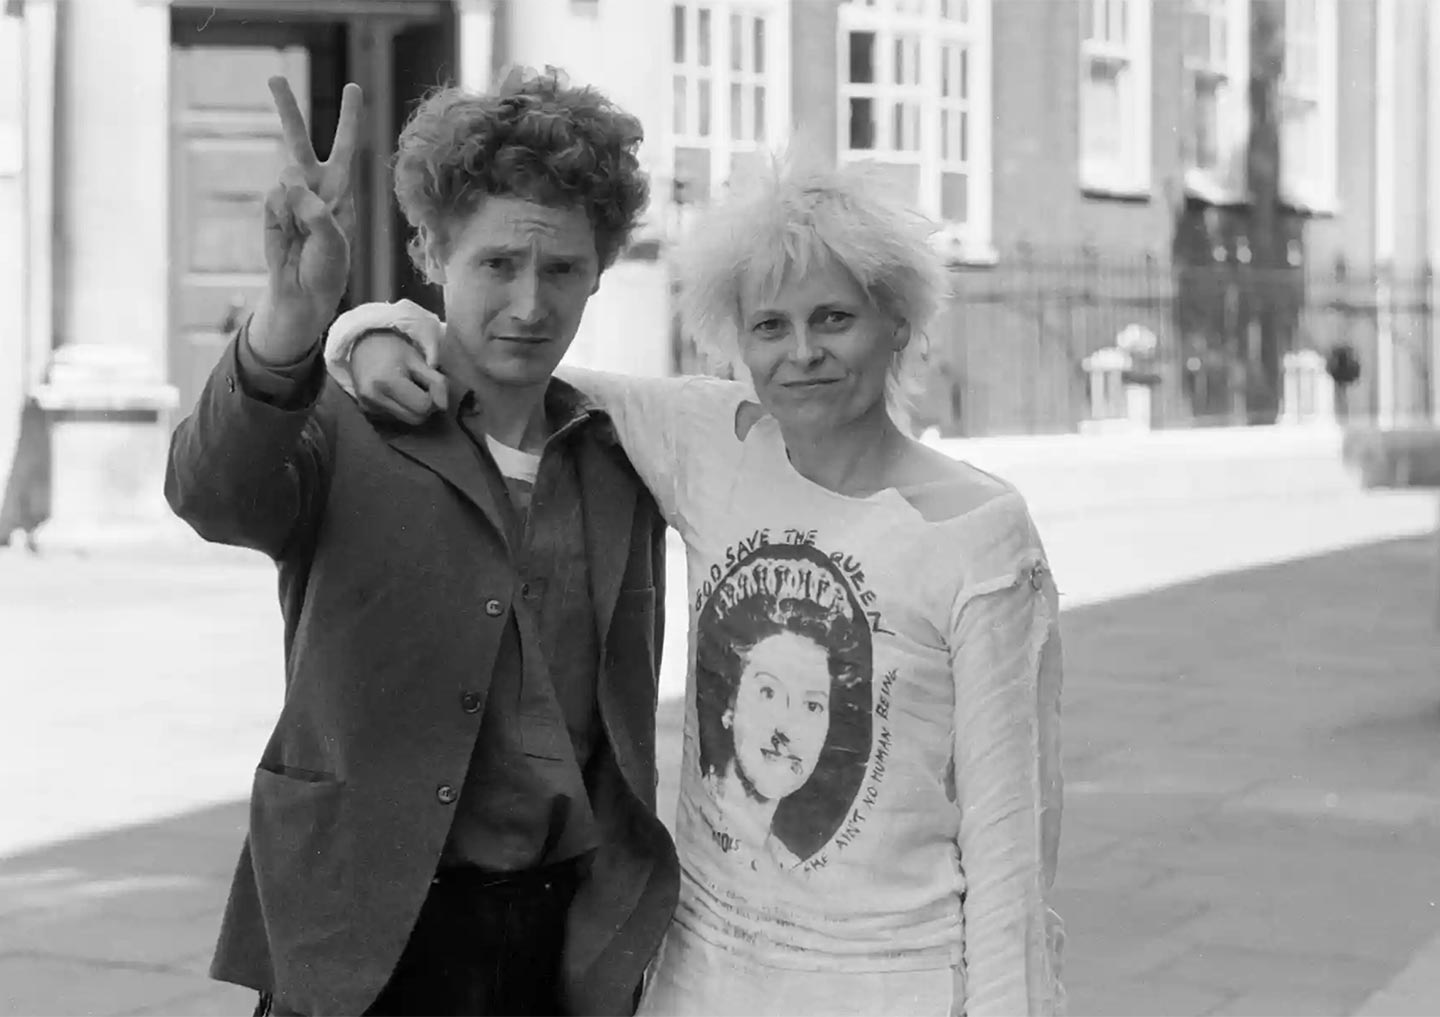 Punk rock group Sex Pistols manager Malcolm McLaren and Vivienne Westwood are seen here outside Bow Street Magistrates’ Court after being remanded on bail for fighting